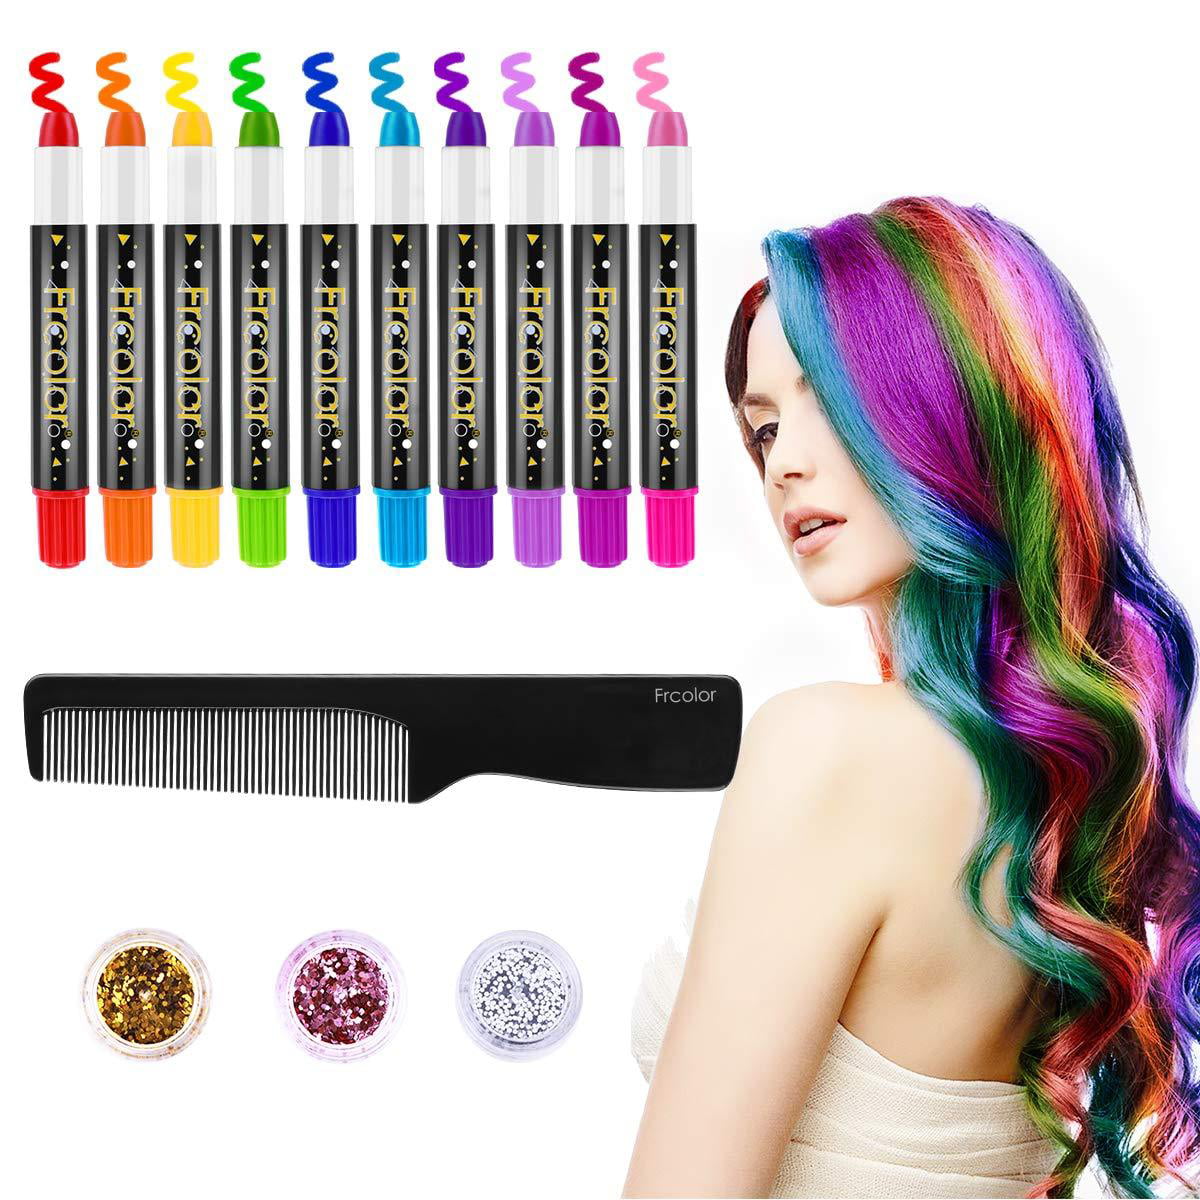 FRCOLOR Hair Chalk for Kids, 10 Colors Temporary Hair Chalk Pens with 3